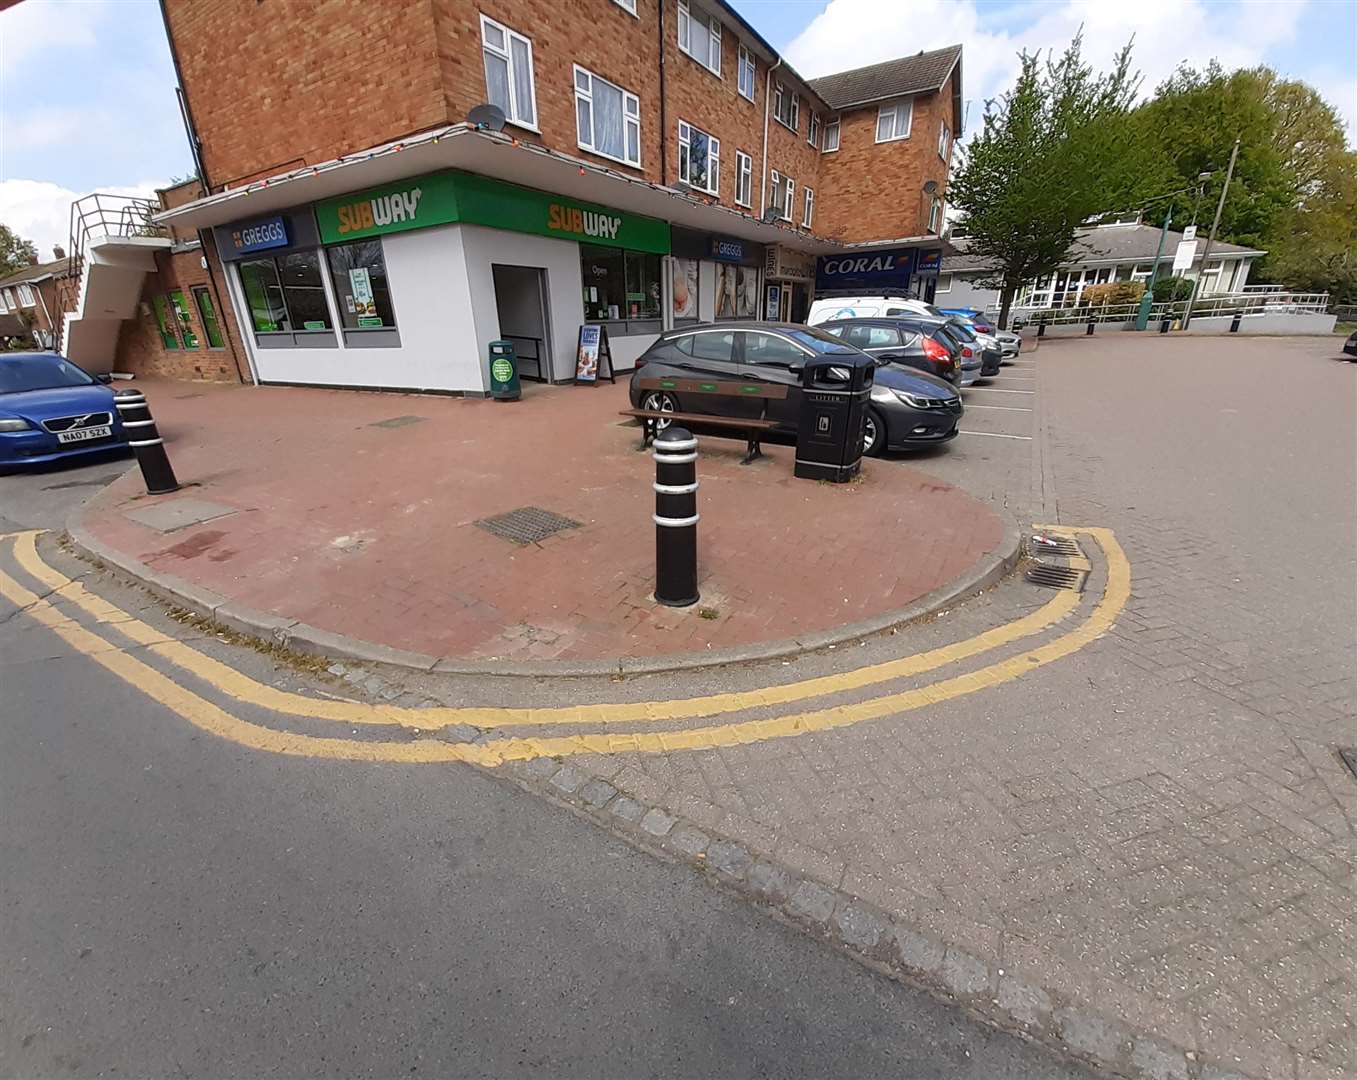 KCC has positioned bollards in the centre of four dropped kerb at The Parade in Staplehurst